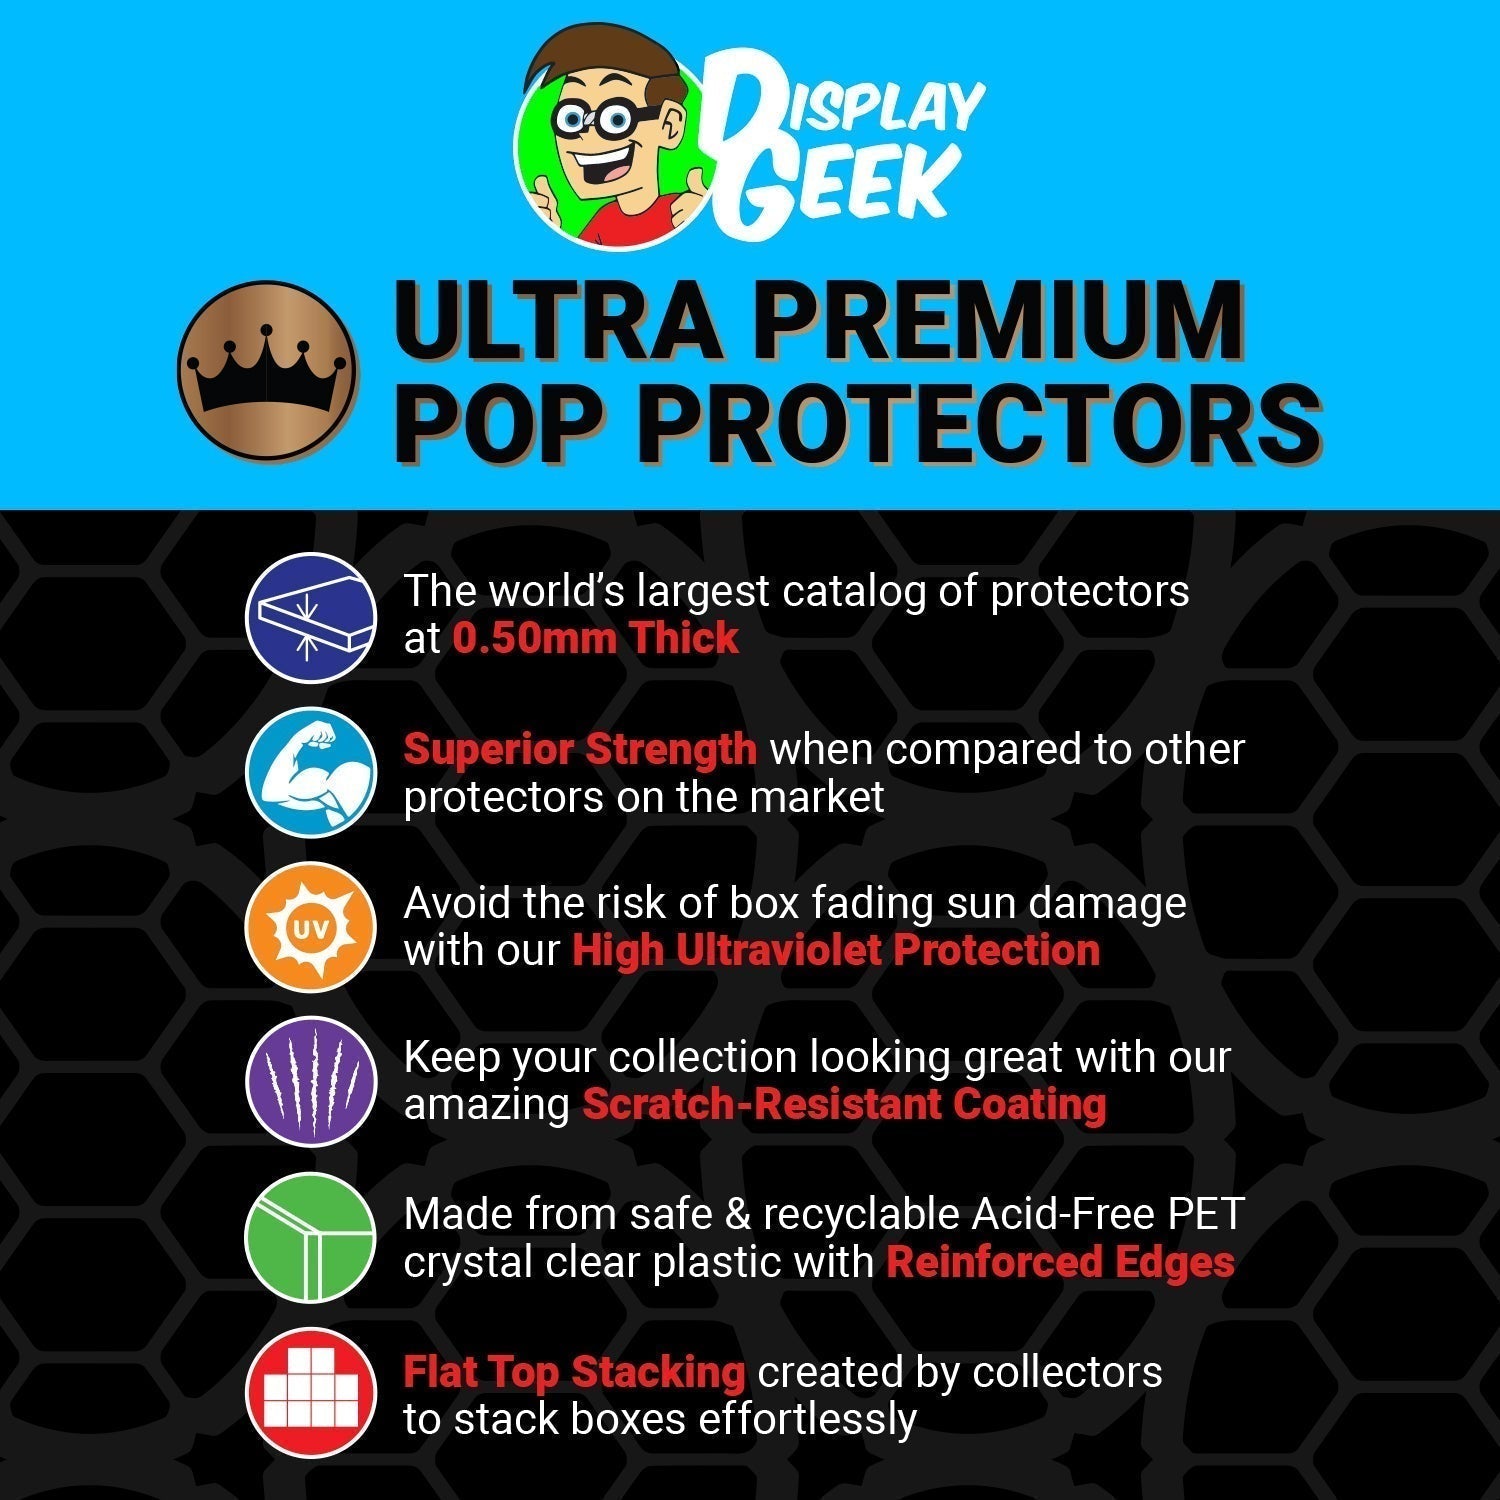 Pop Protector for Boba Fett #01 Funko Pop Die-Cast Outer Box - PPG Pop Protector Guide Search Created by Display Geek